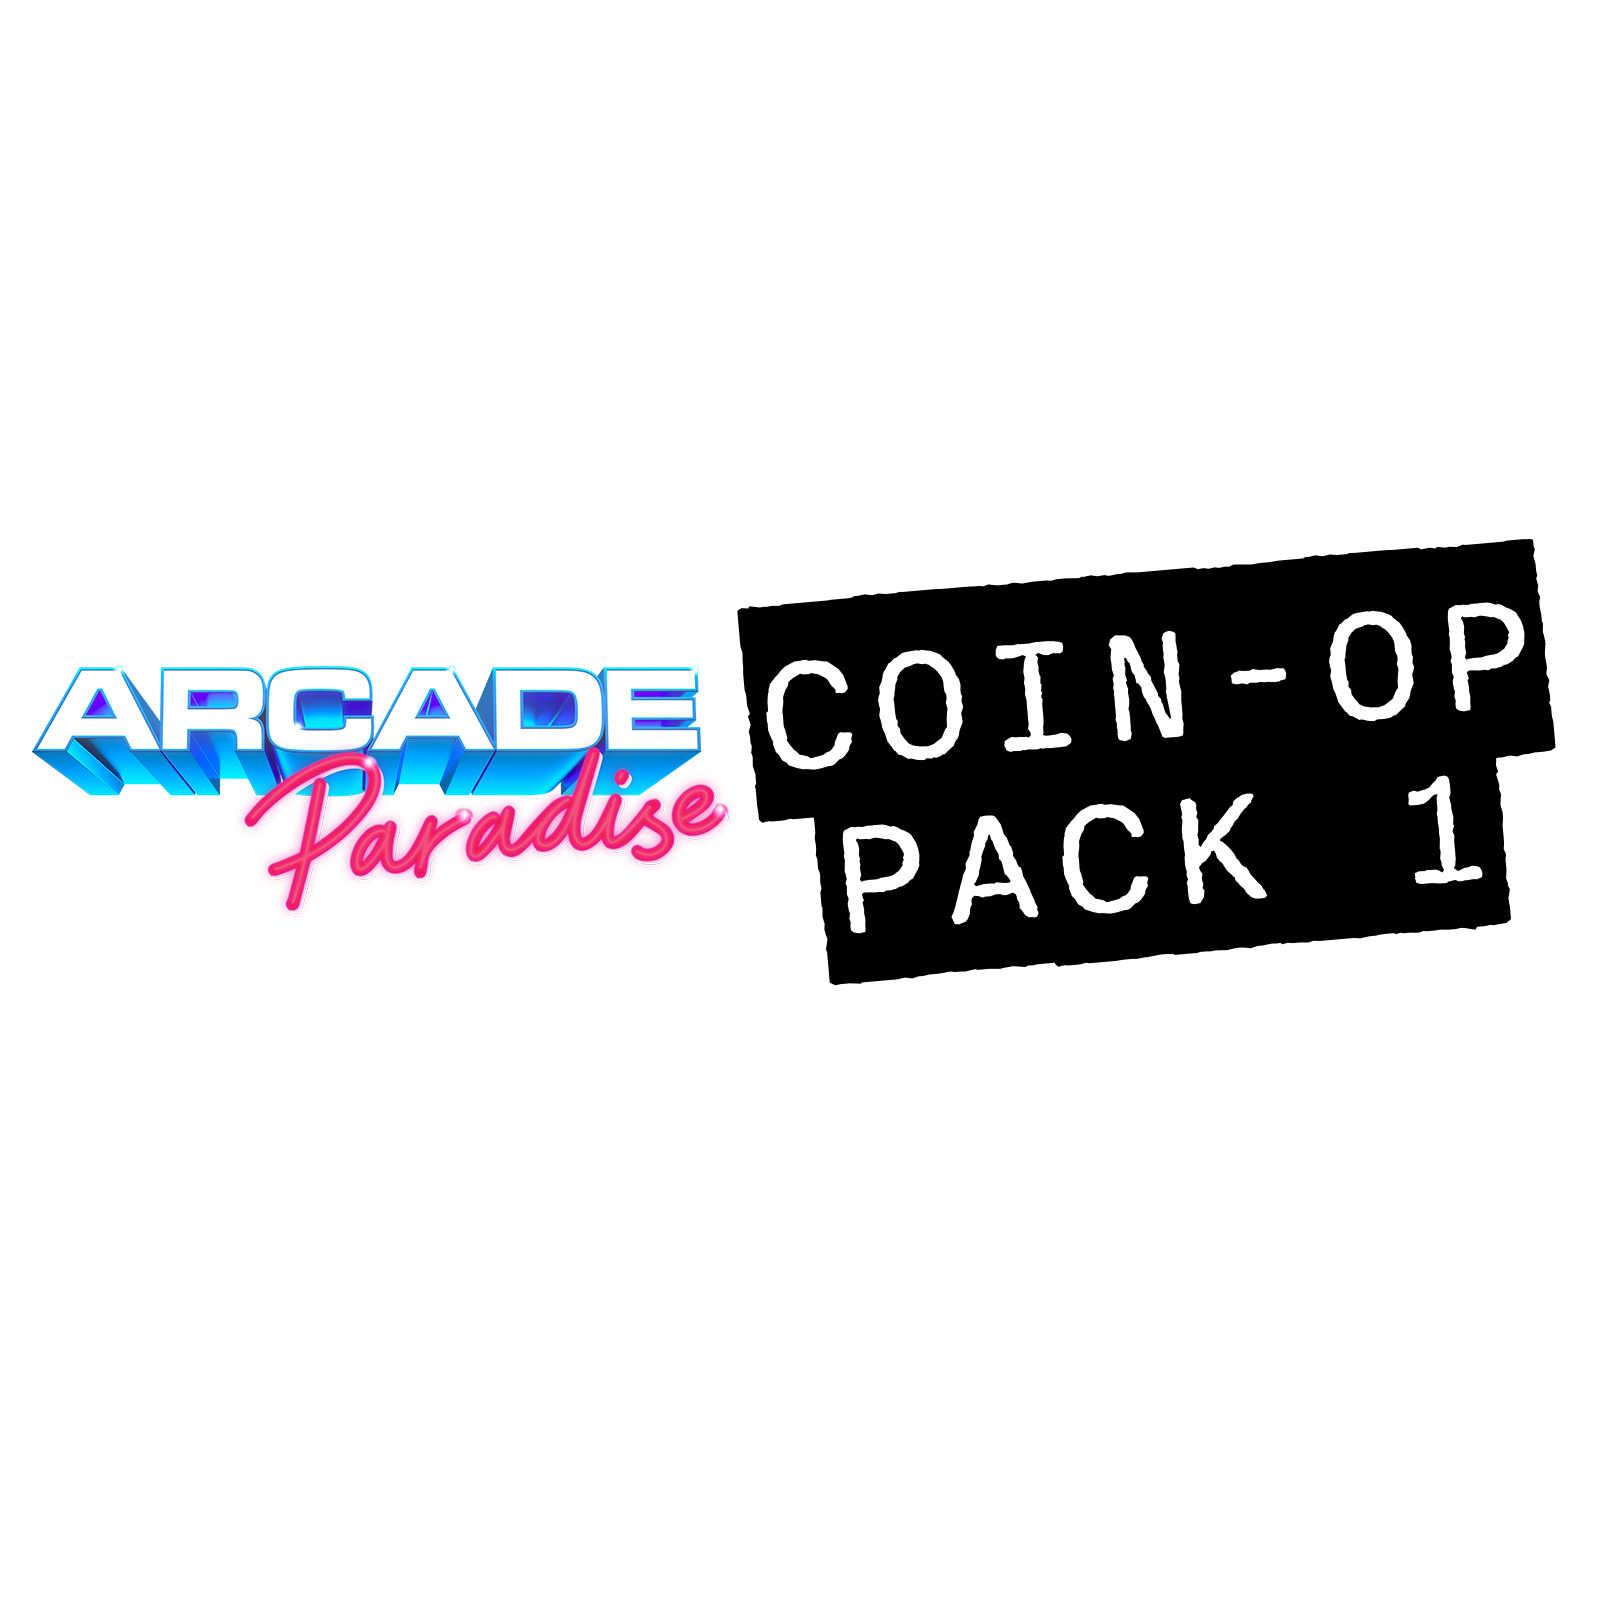 Arcade Paradise: Coin-Op Pack 1